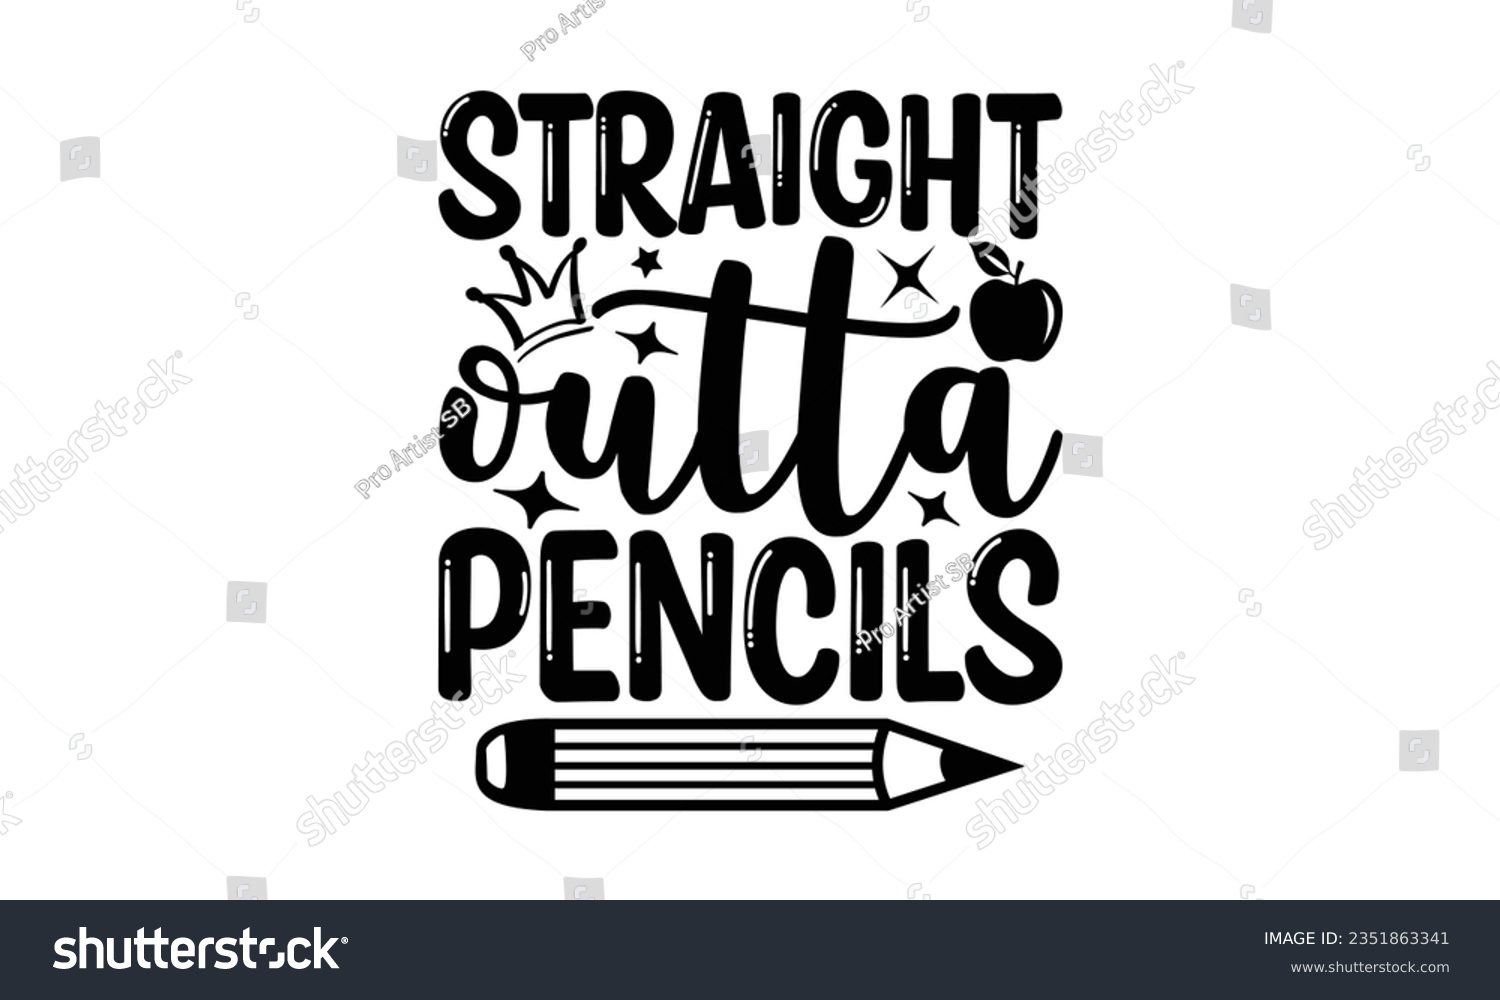 SVG of Straight outta pencils - School SVG Design Sublimation, Back To School Quotes, Calligraphy Graphic Design, Typography Poster with Old Style Camera and Quote. svg